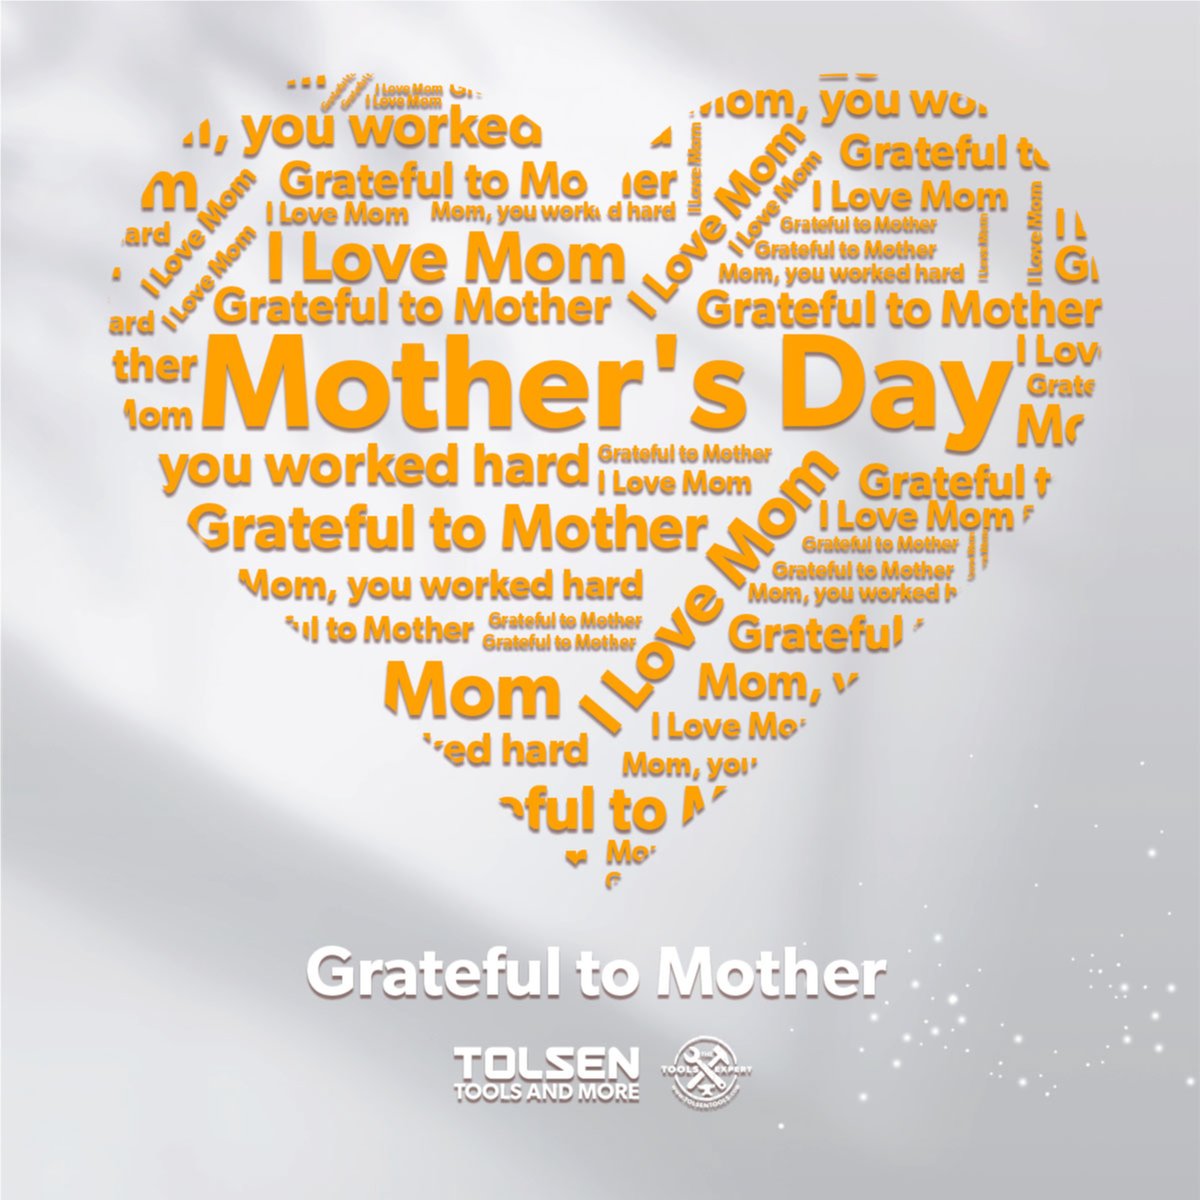 Happy Mother's Day from TOLSEN Tools! We celebrate the strength, love, and dedication of all the amazing mothers out there. May your every day be filled with joy, appreciation, and well-deserved pampering. #MothersDay #mothersday2024